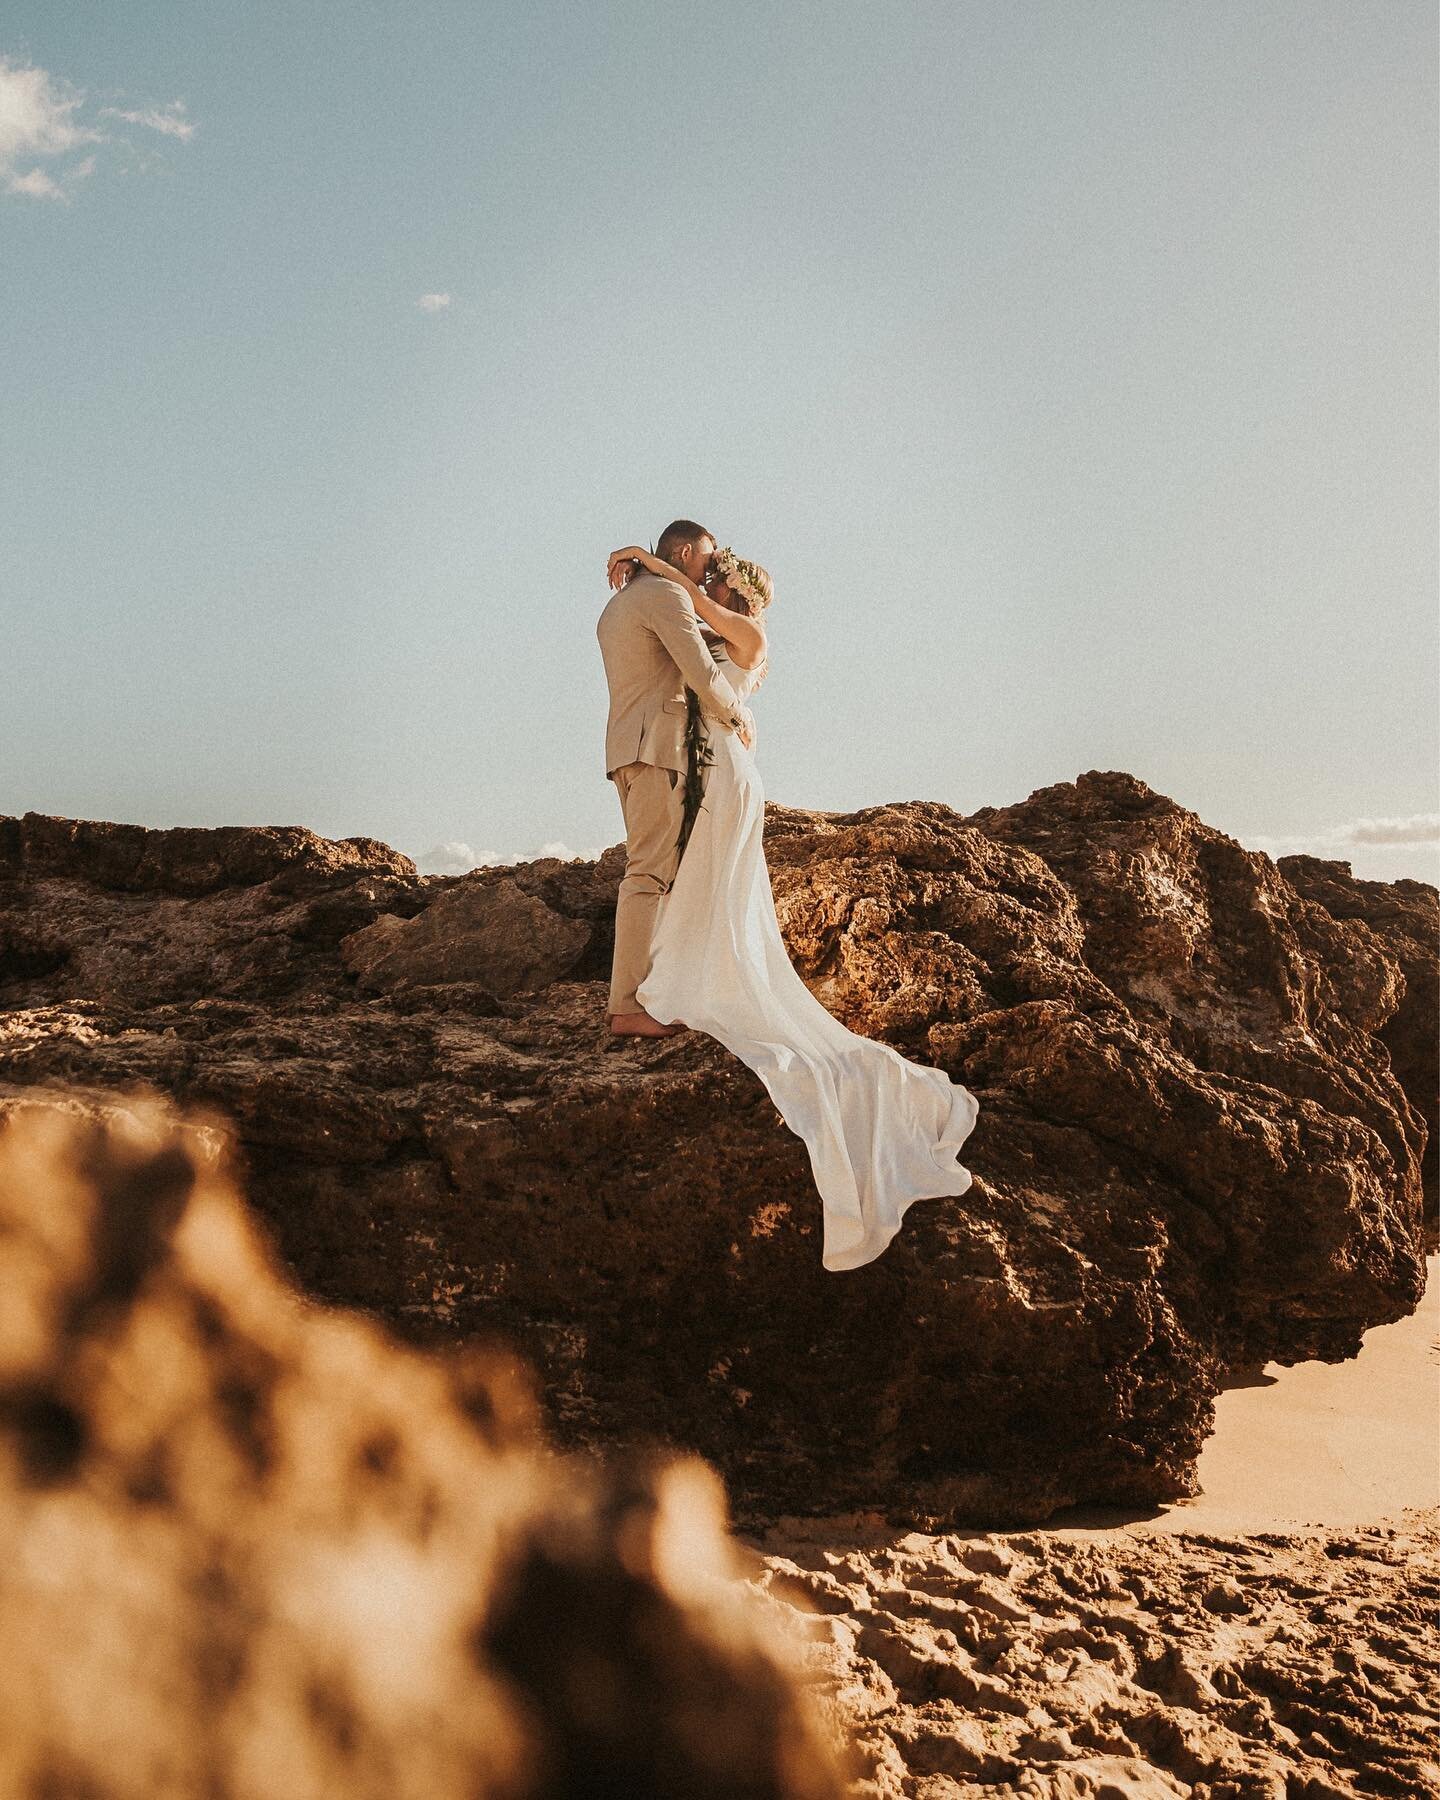 Tying the knot in Hawaiʻi!! 💍
 
Hawaiʻi is one of the top places to elope at when it comes to beach elopement locations! We have beautiful crystal blue waters and beautiful mountain backdrops that screams TROPICAL OASIS for whoever is looking for th